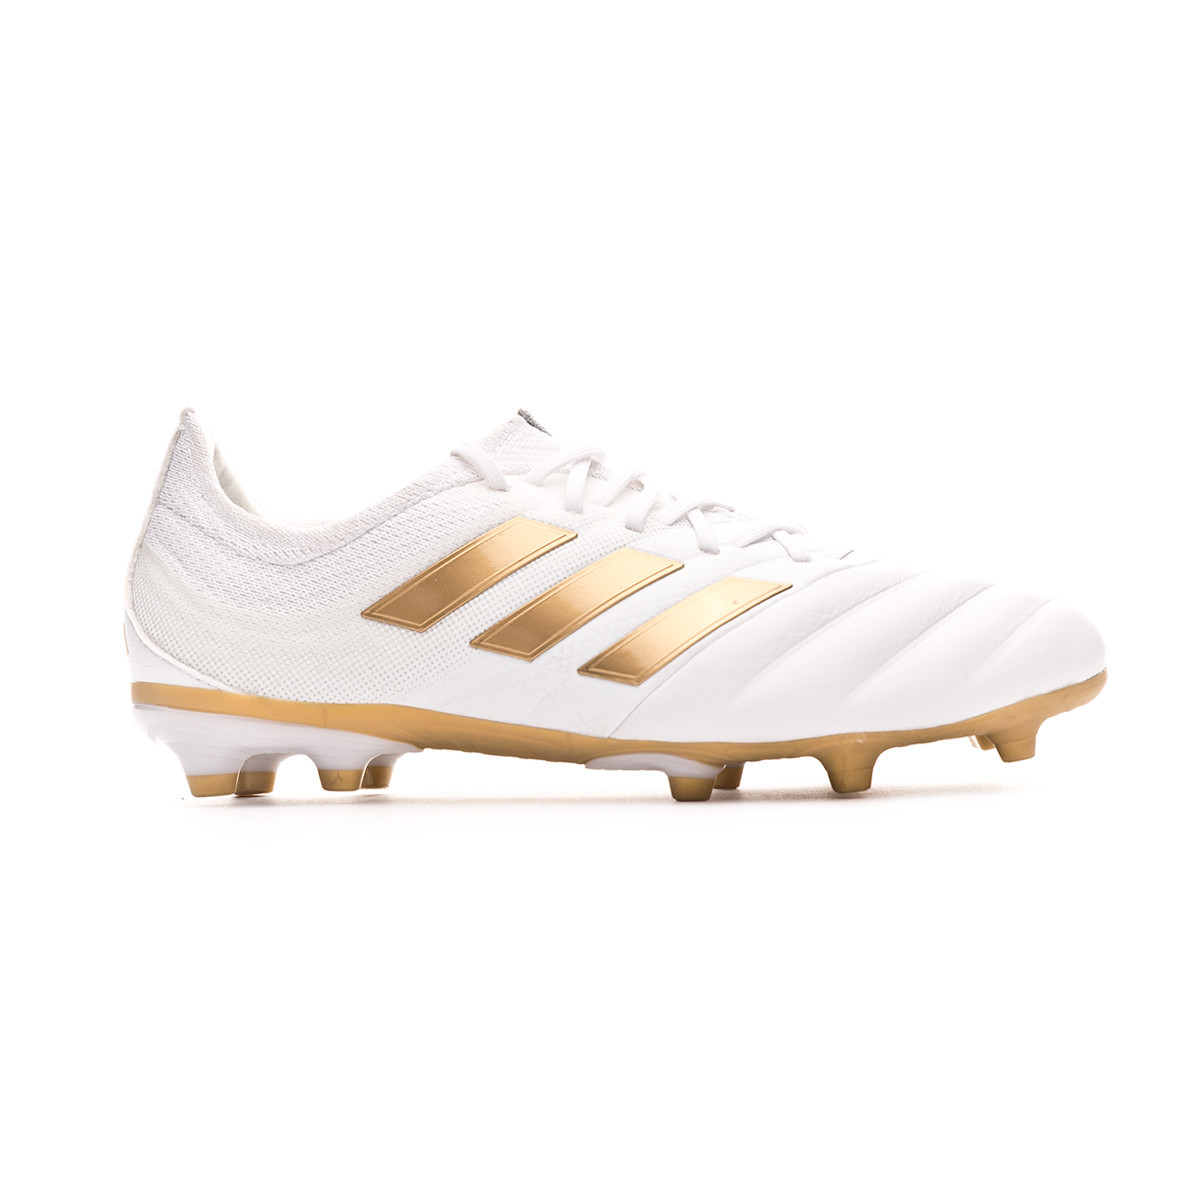 adidas copa 19.1 white and gold